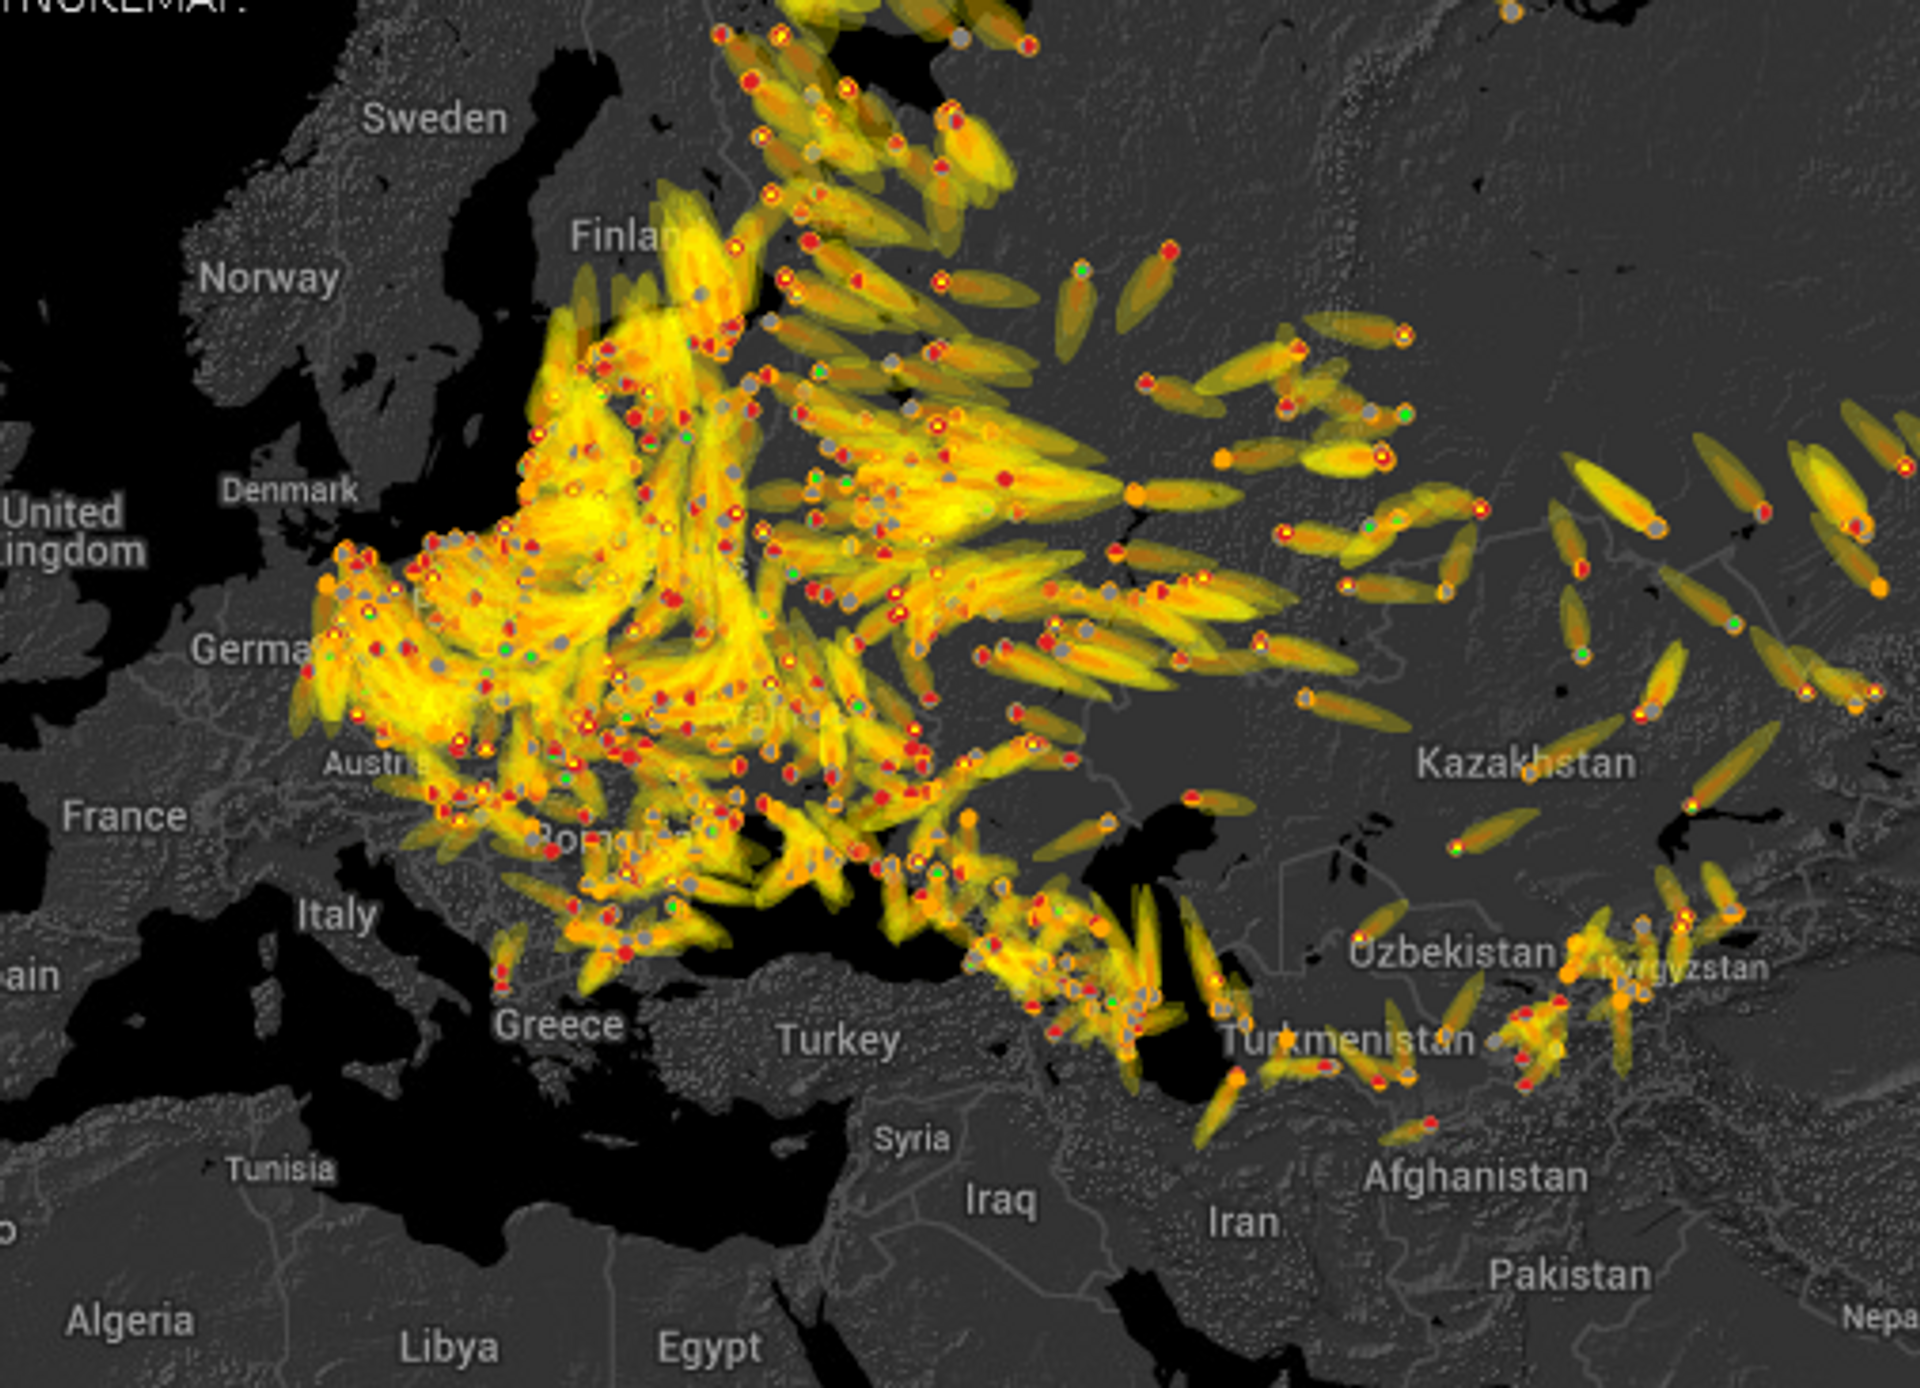 Zoomed in map featuring US nuclear targets in Eastern Europe, including Ukraine (the orange-covered bit above Turkey and the Black Sea) in a render created by the Future of Life Institute by Alex Wellerstein. - Sputnik International, 1920, 03.11.2022